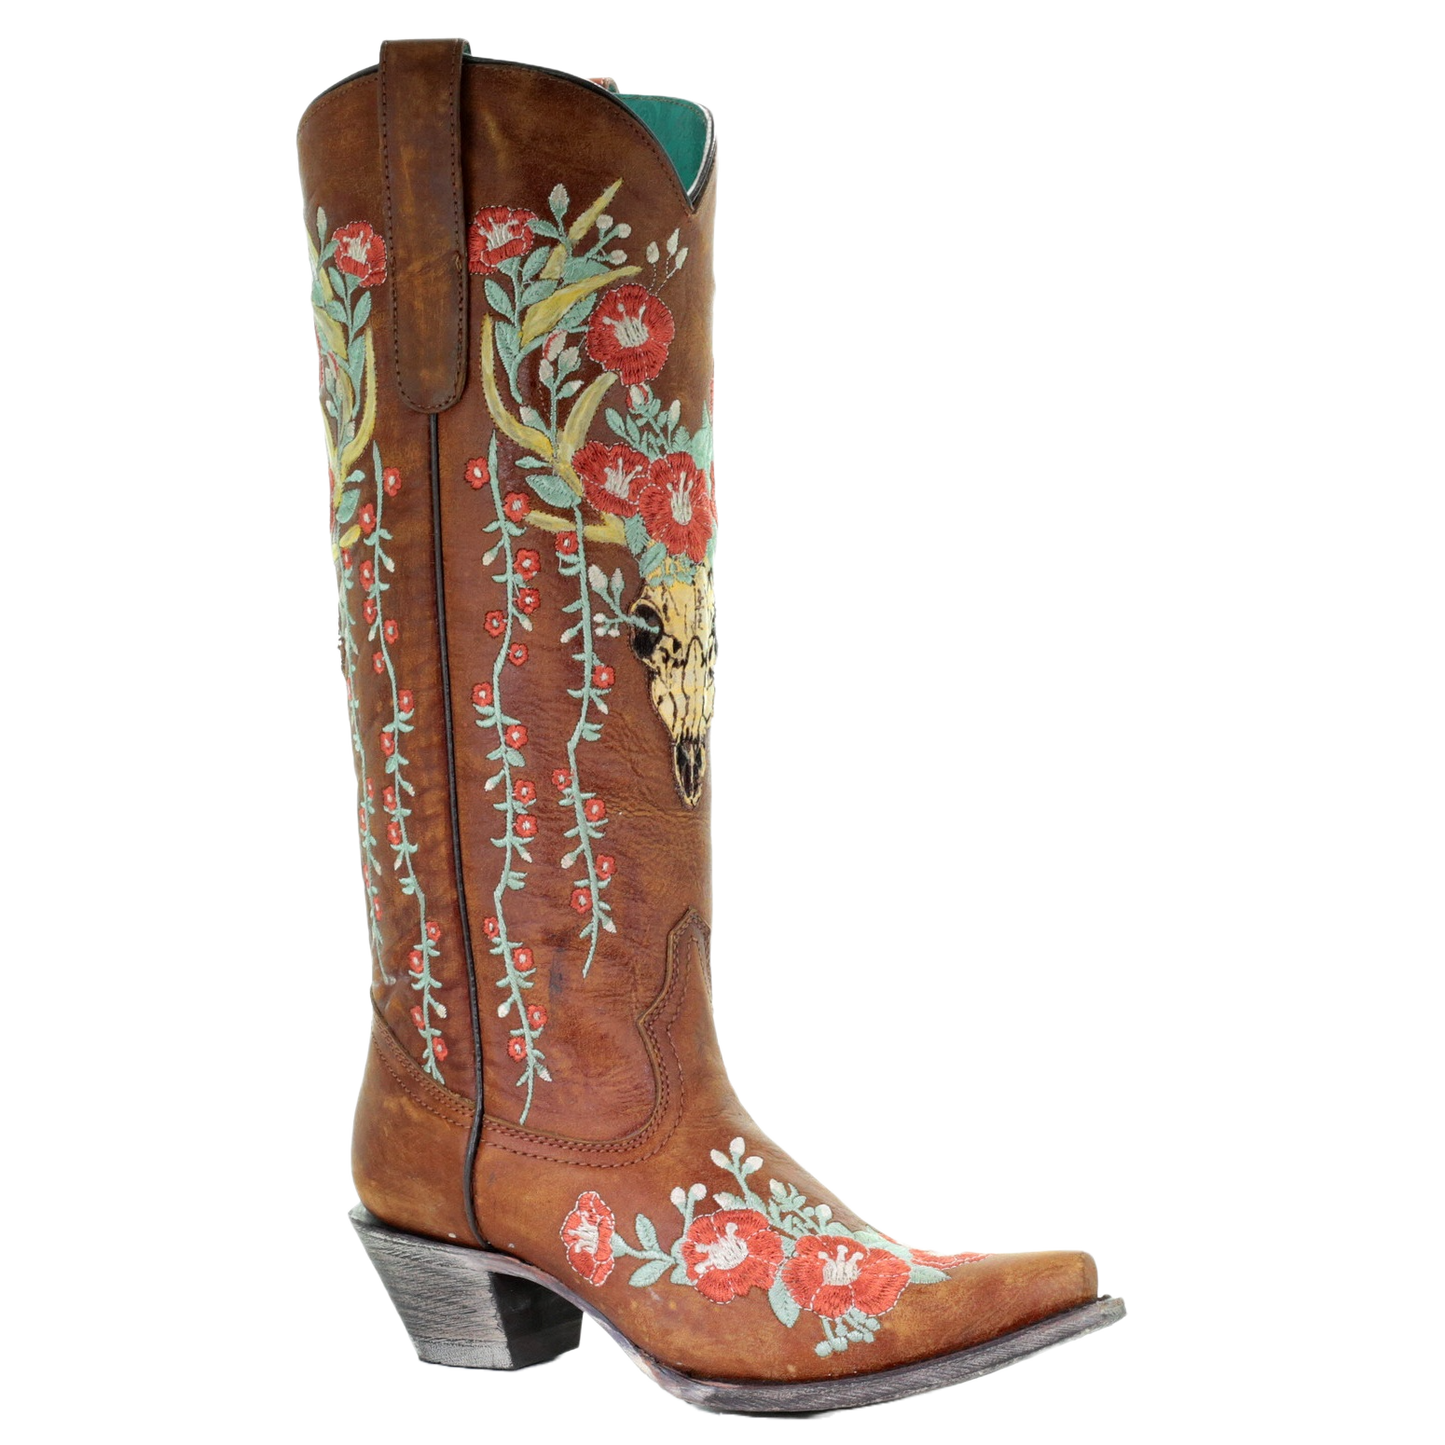 Corral Ladies Juliet Tan Deer Skull Floral Embroidery Boots A3620